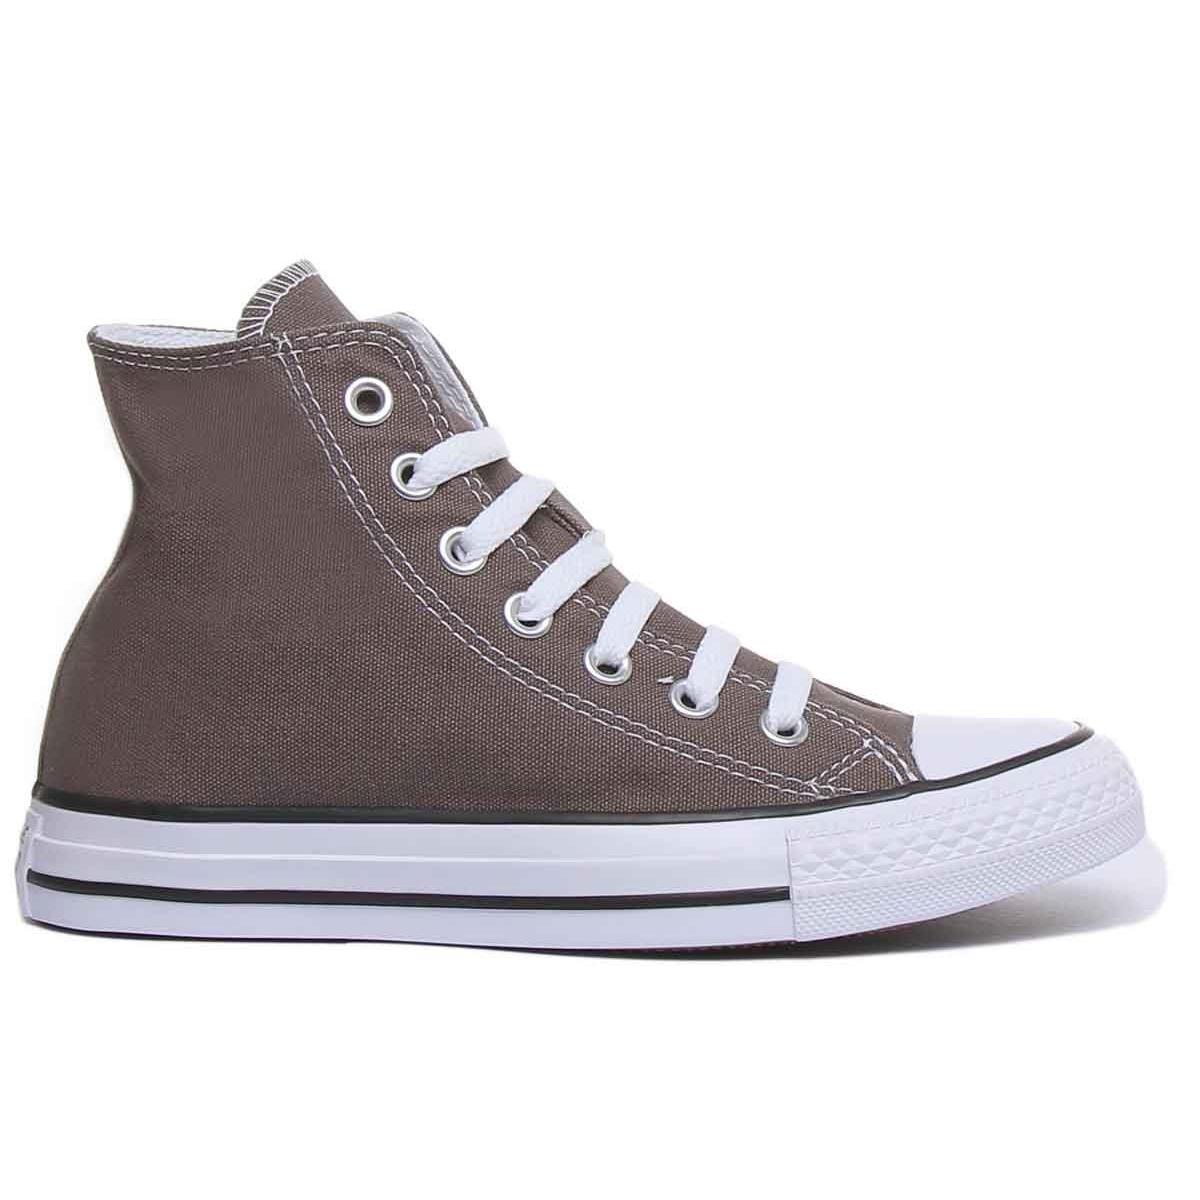 Converse All Star Hi Unisex Lace Up Canvas Sneaker In Charcoal Size US 7 - 12